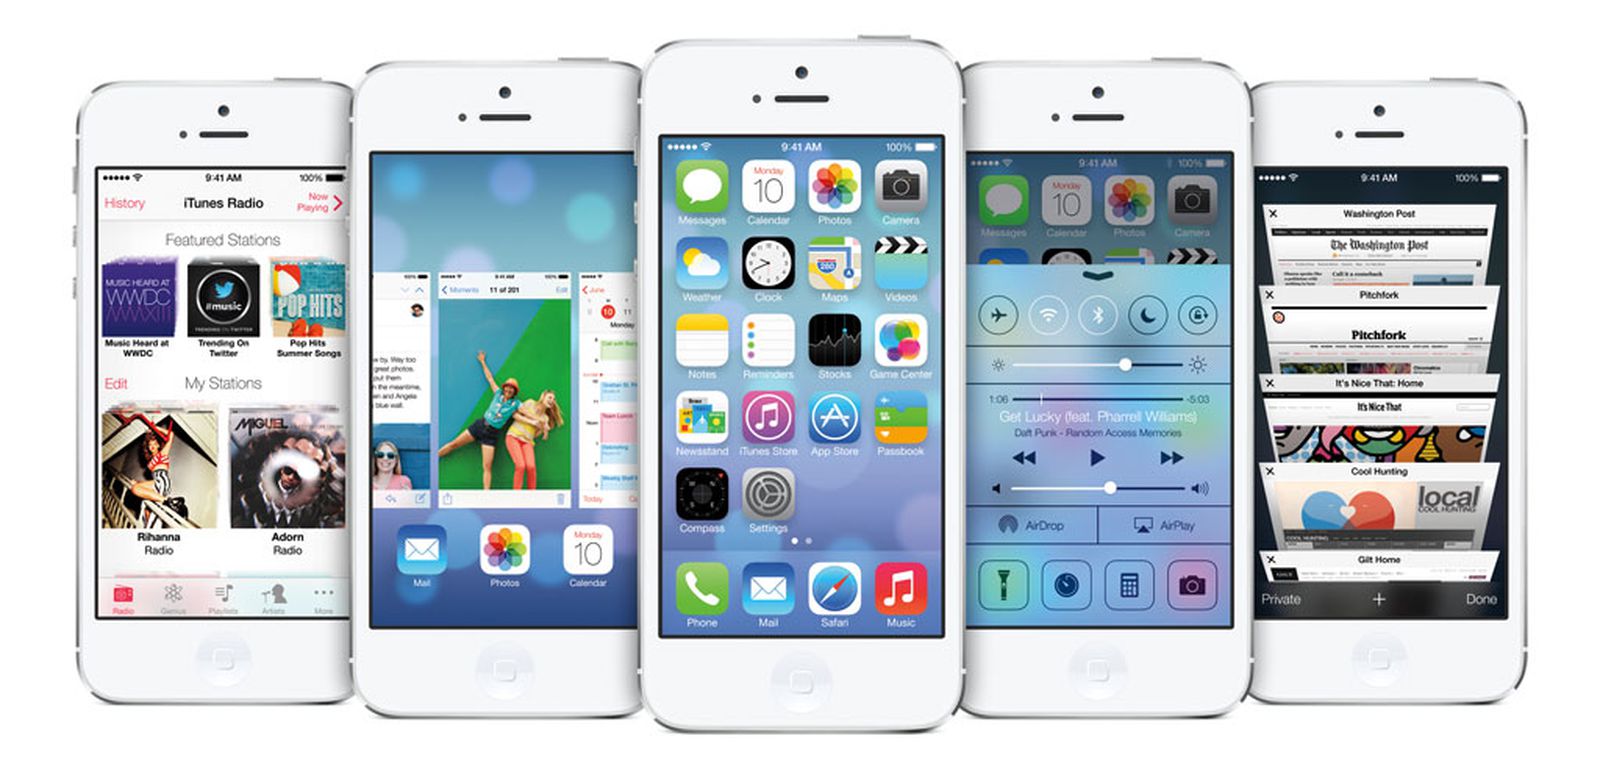 iOS 7 was an antidote to skeumorphism that went too far. 